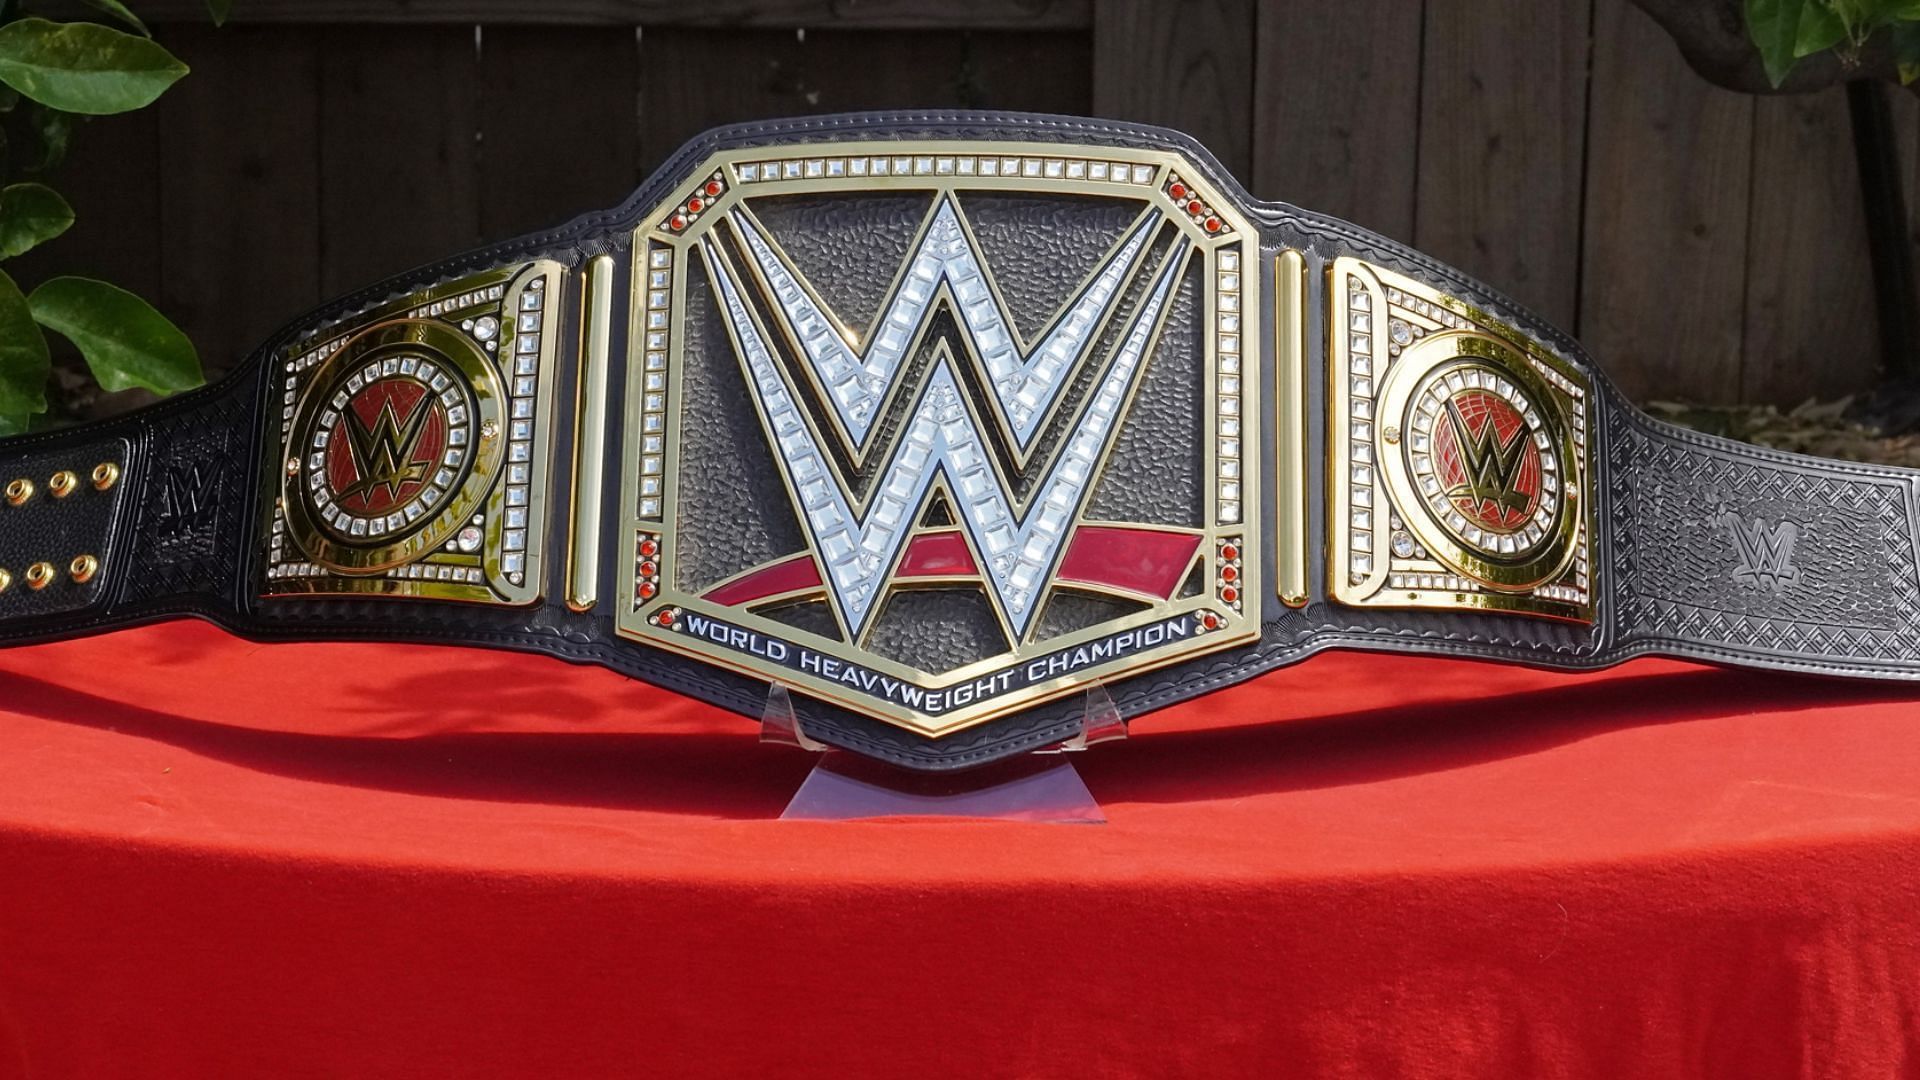 The oldest belt in WWE history